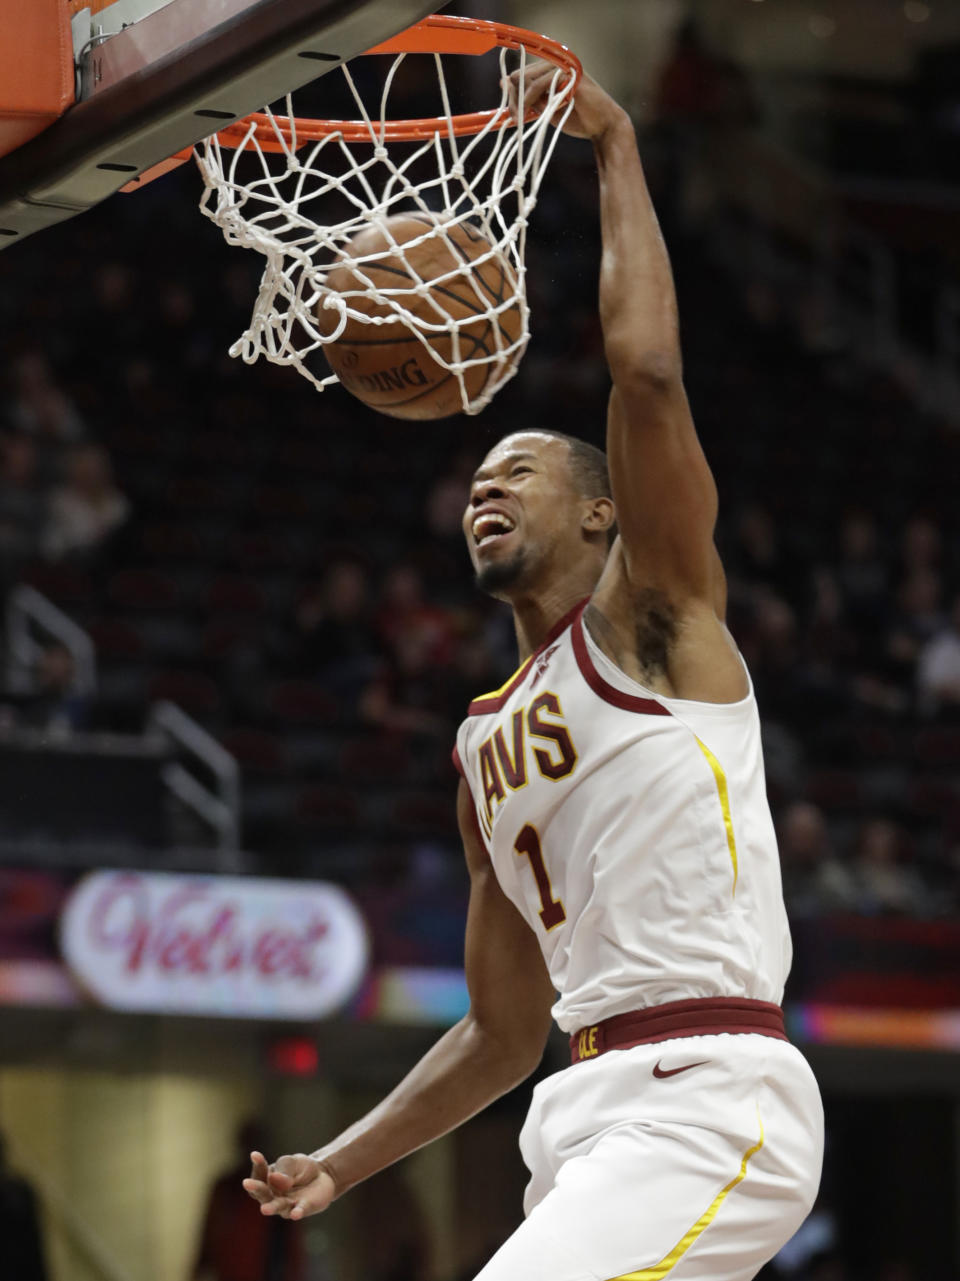 Cleveland Cavaliers' Rodney Hood dunks the ball against the Atlanta Hawks in the first half of an NBA basketball game, Tuesday, Oct. 30, 2018, in Cleveland. (AP Photo/Tony Dejak)